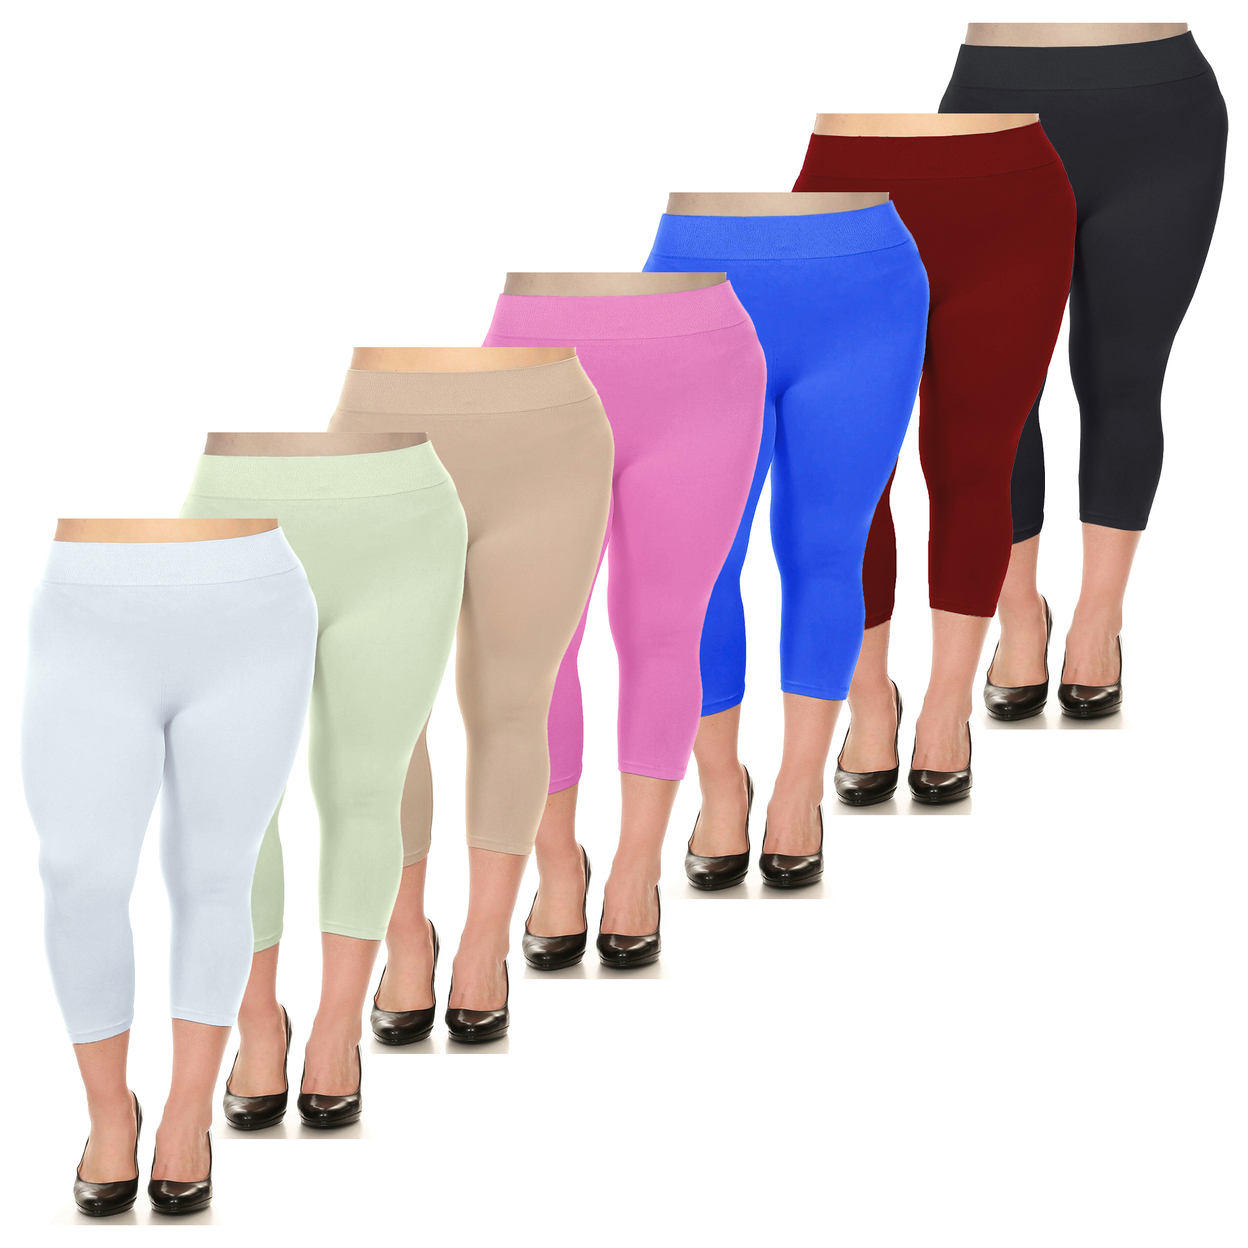 2-Pack: Women's Ultra-Soft High Waisted Smooth Stretch Active Yoga Capri Leggings Plus Size Available - Red & Red, 2x